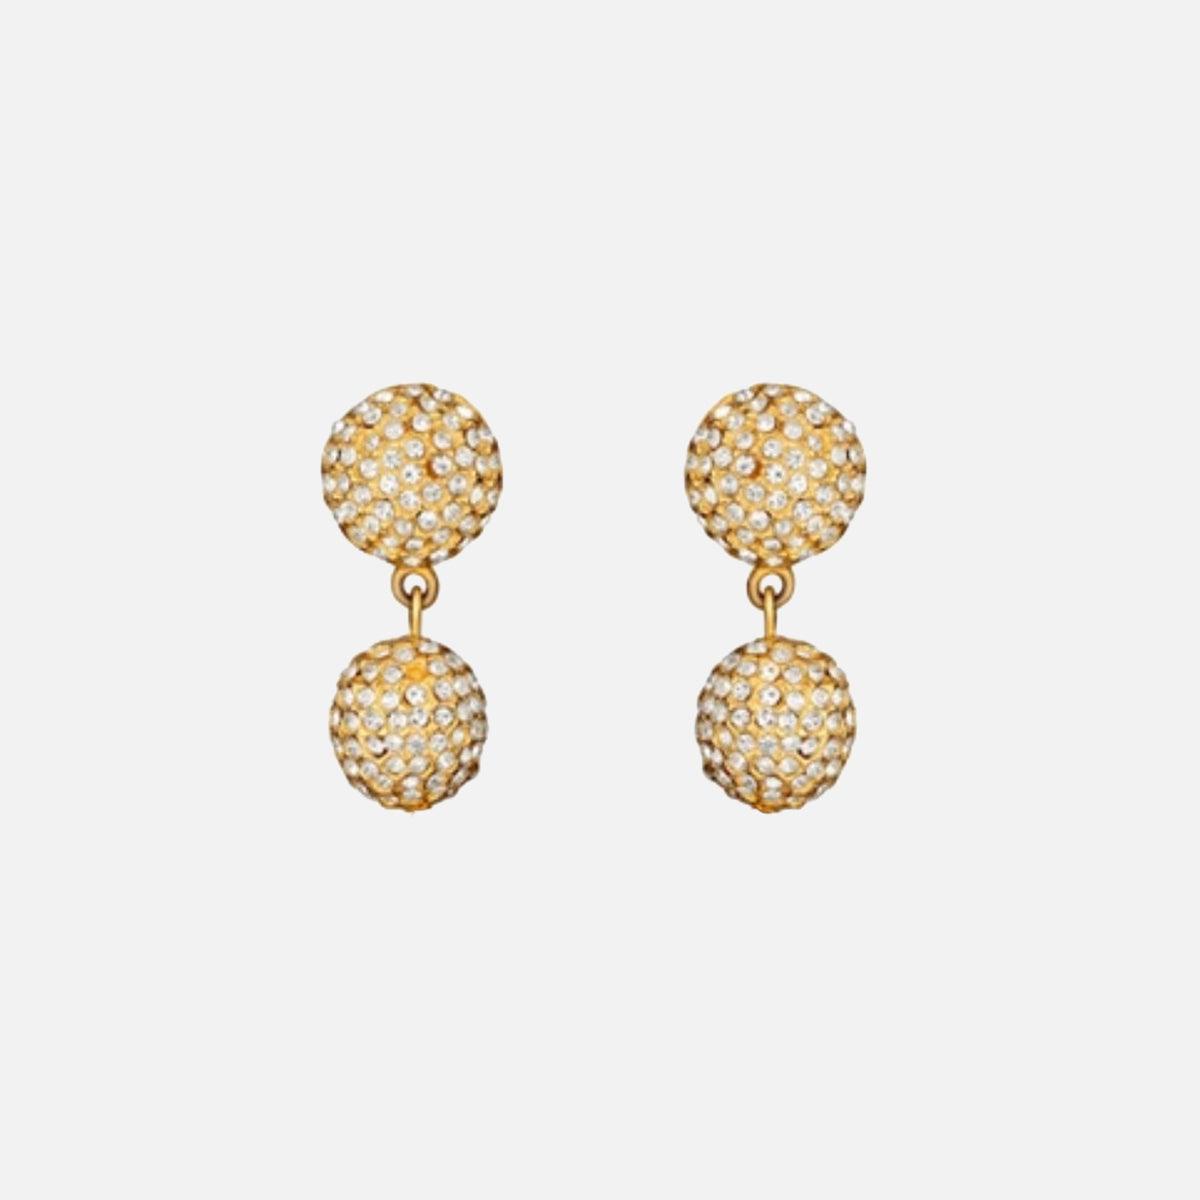 Christina Caruso Pave Ball 2 Drop Earrings - At Present Jewelry